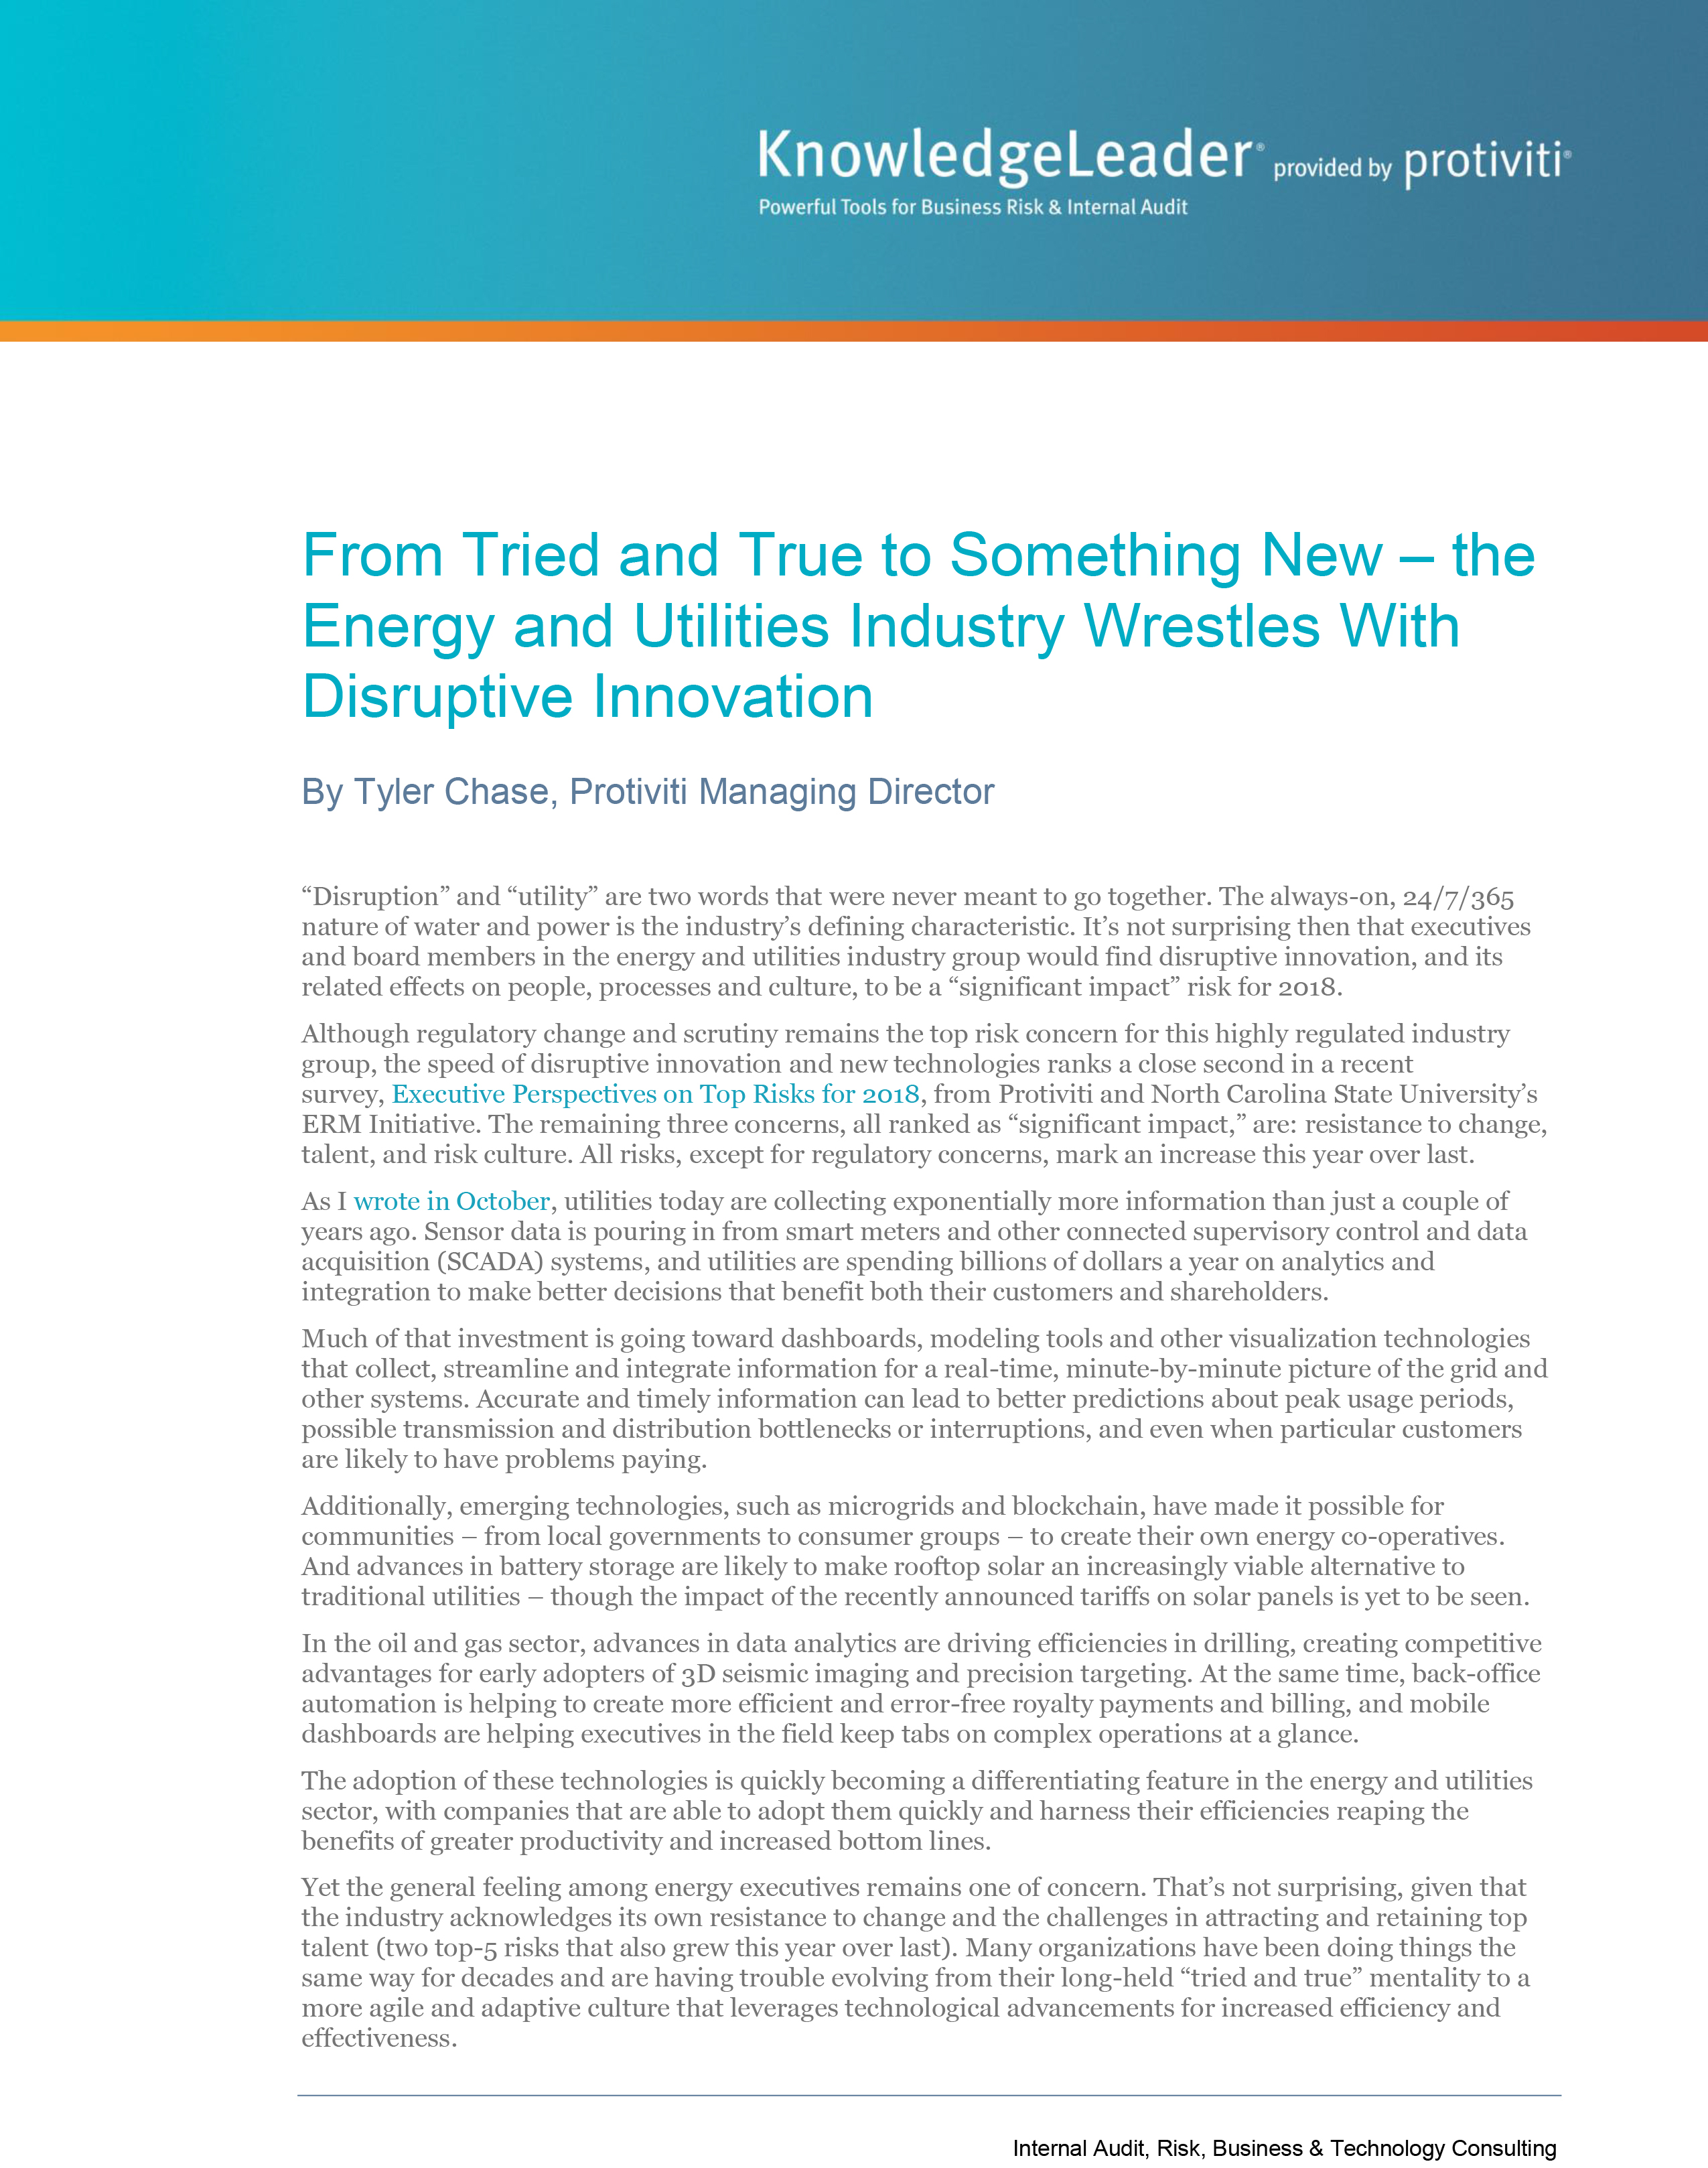 Screenshot of the first page of From Tried and True to Something New – The Energy and Utilities Industry Wrestles With Disruptive Innovation